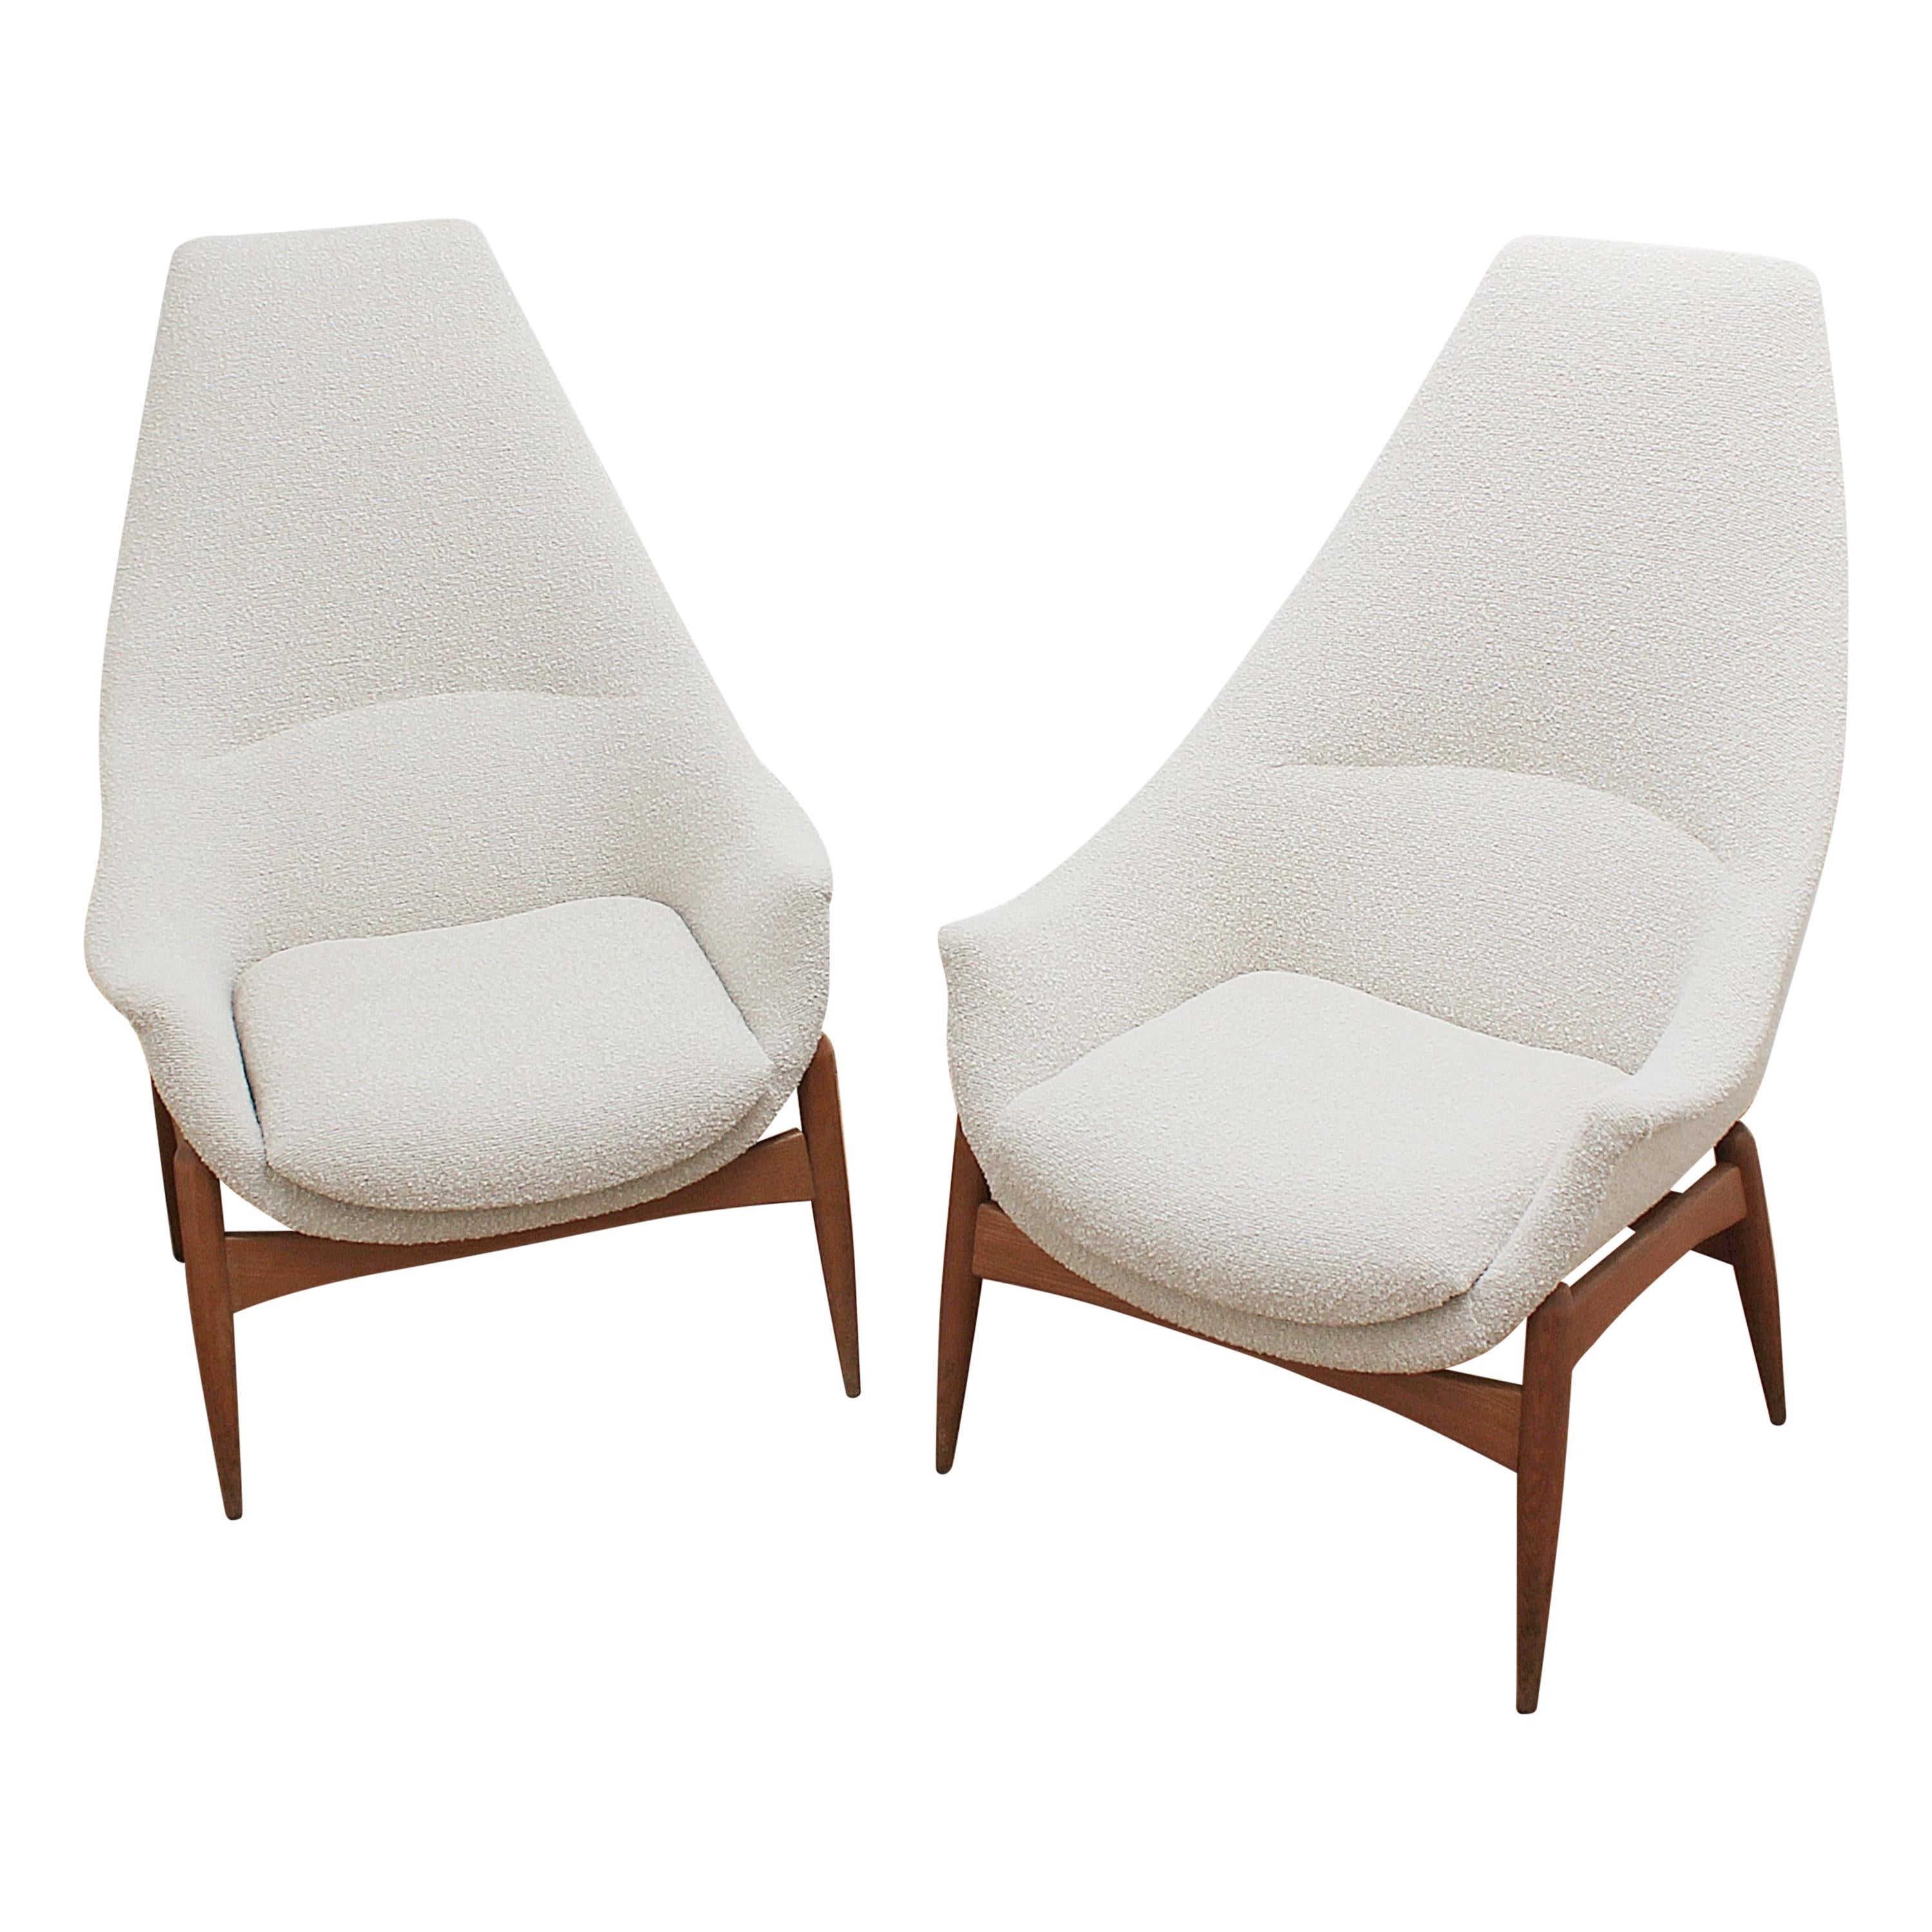 Pair of Armchairs by Julia Gaubek, New Upholstery, Hungary, circa 1970